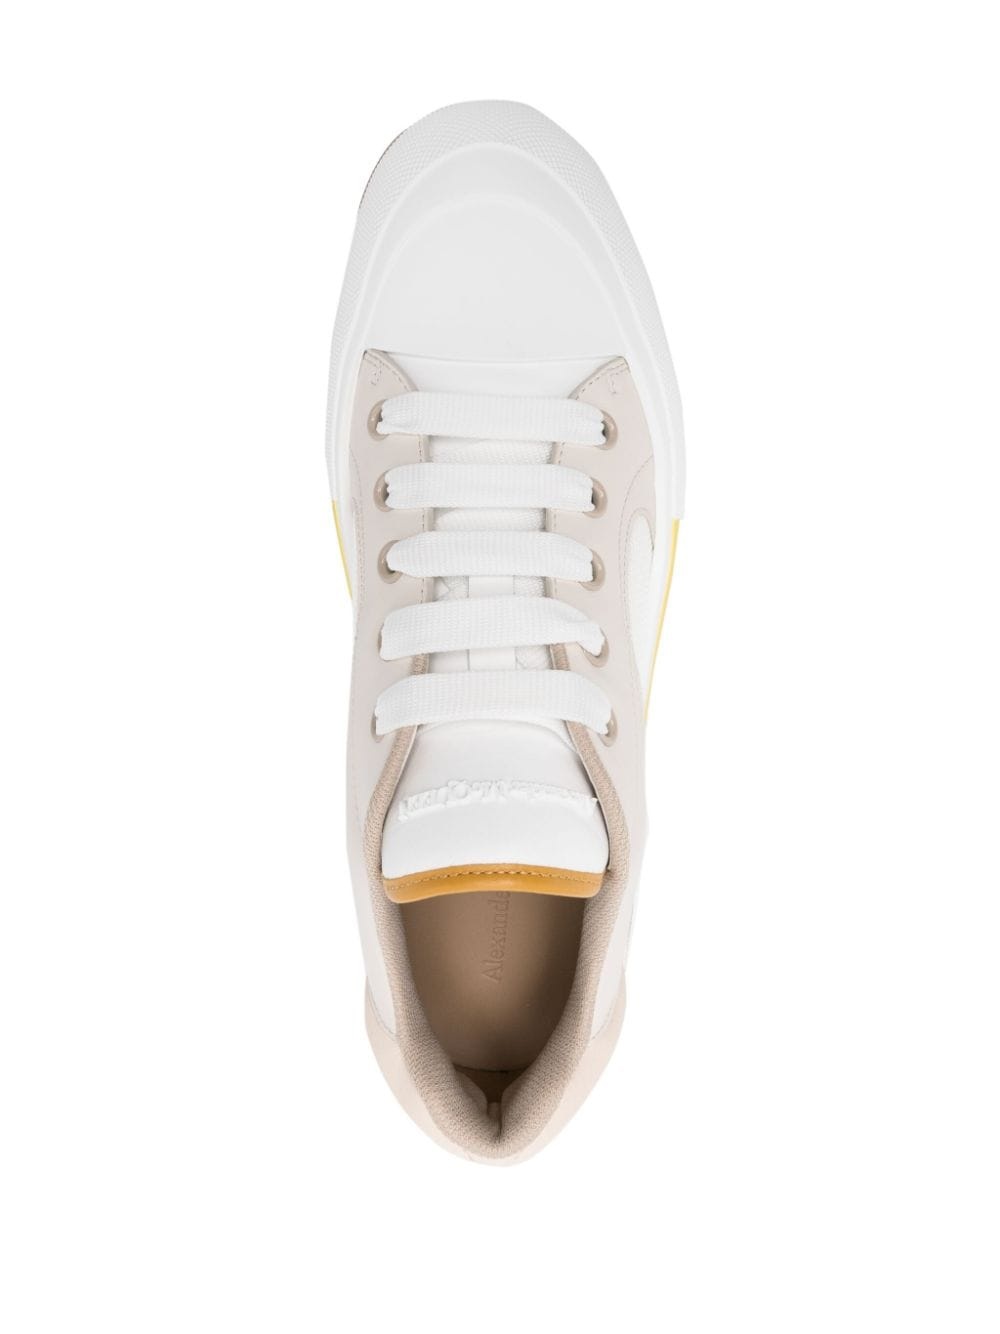 Seal-embroidered leather sneakers - 4